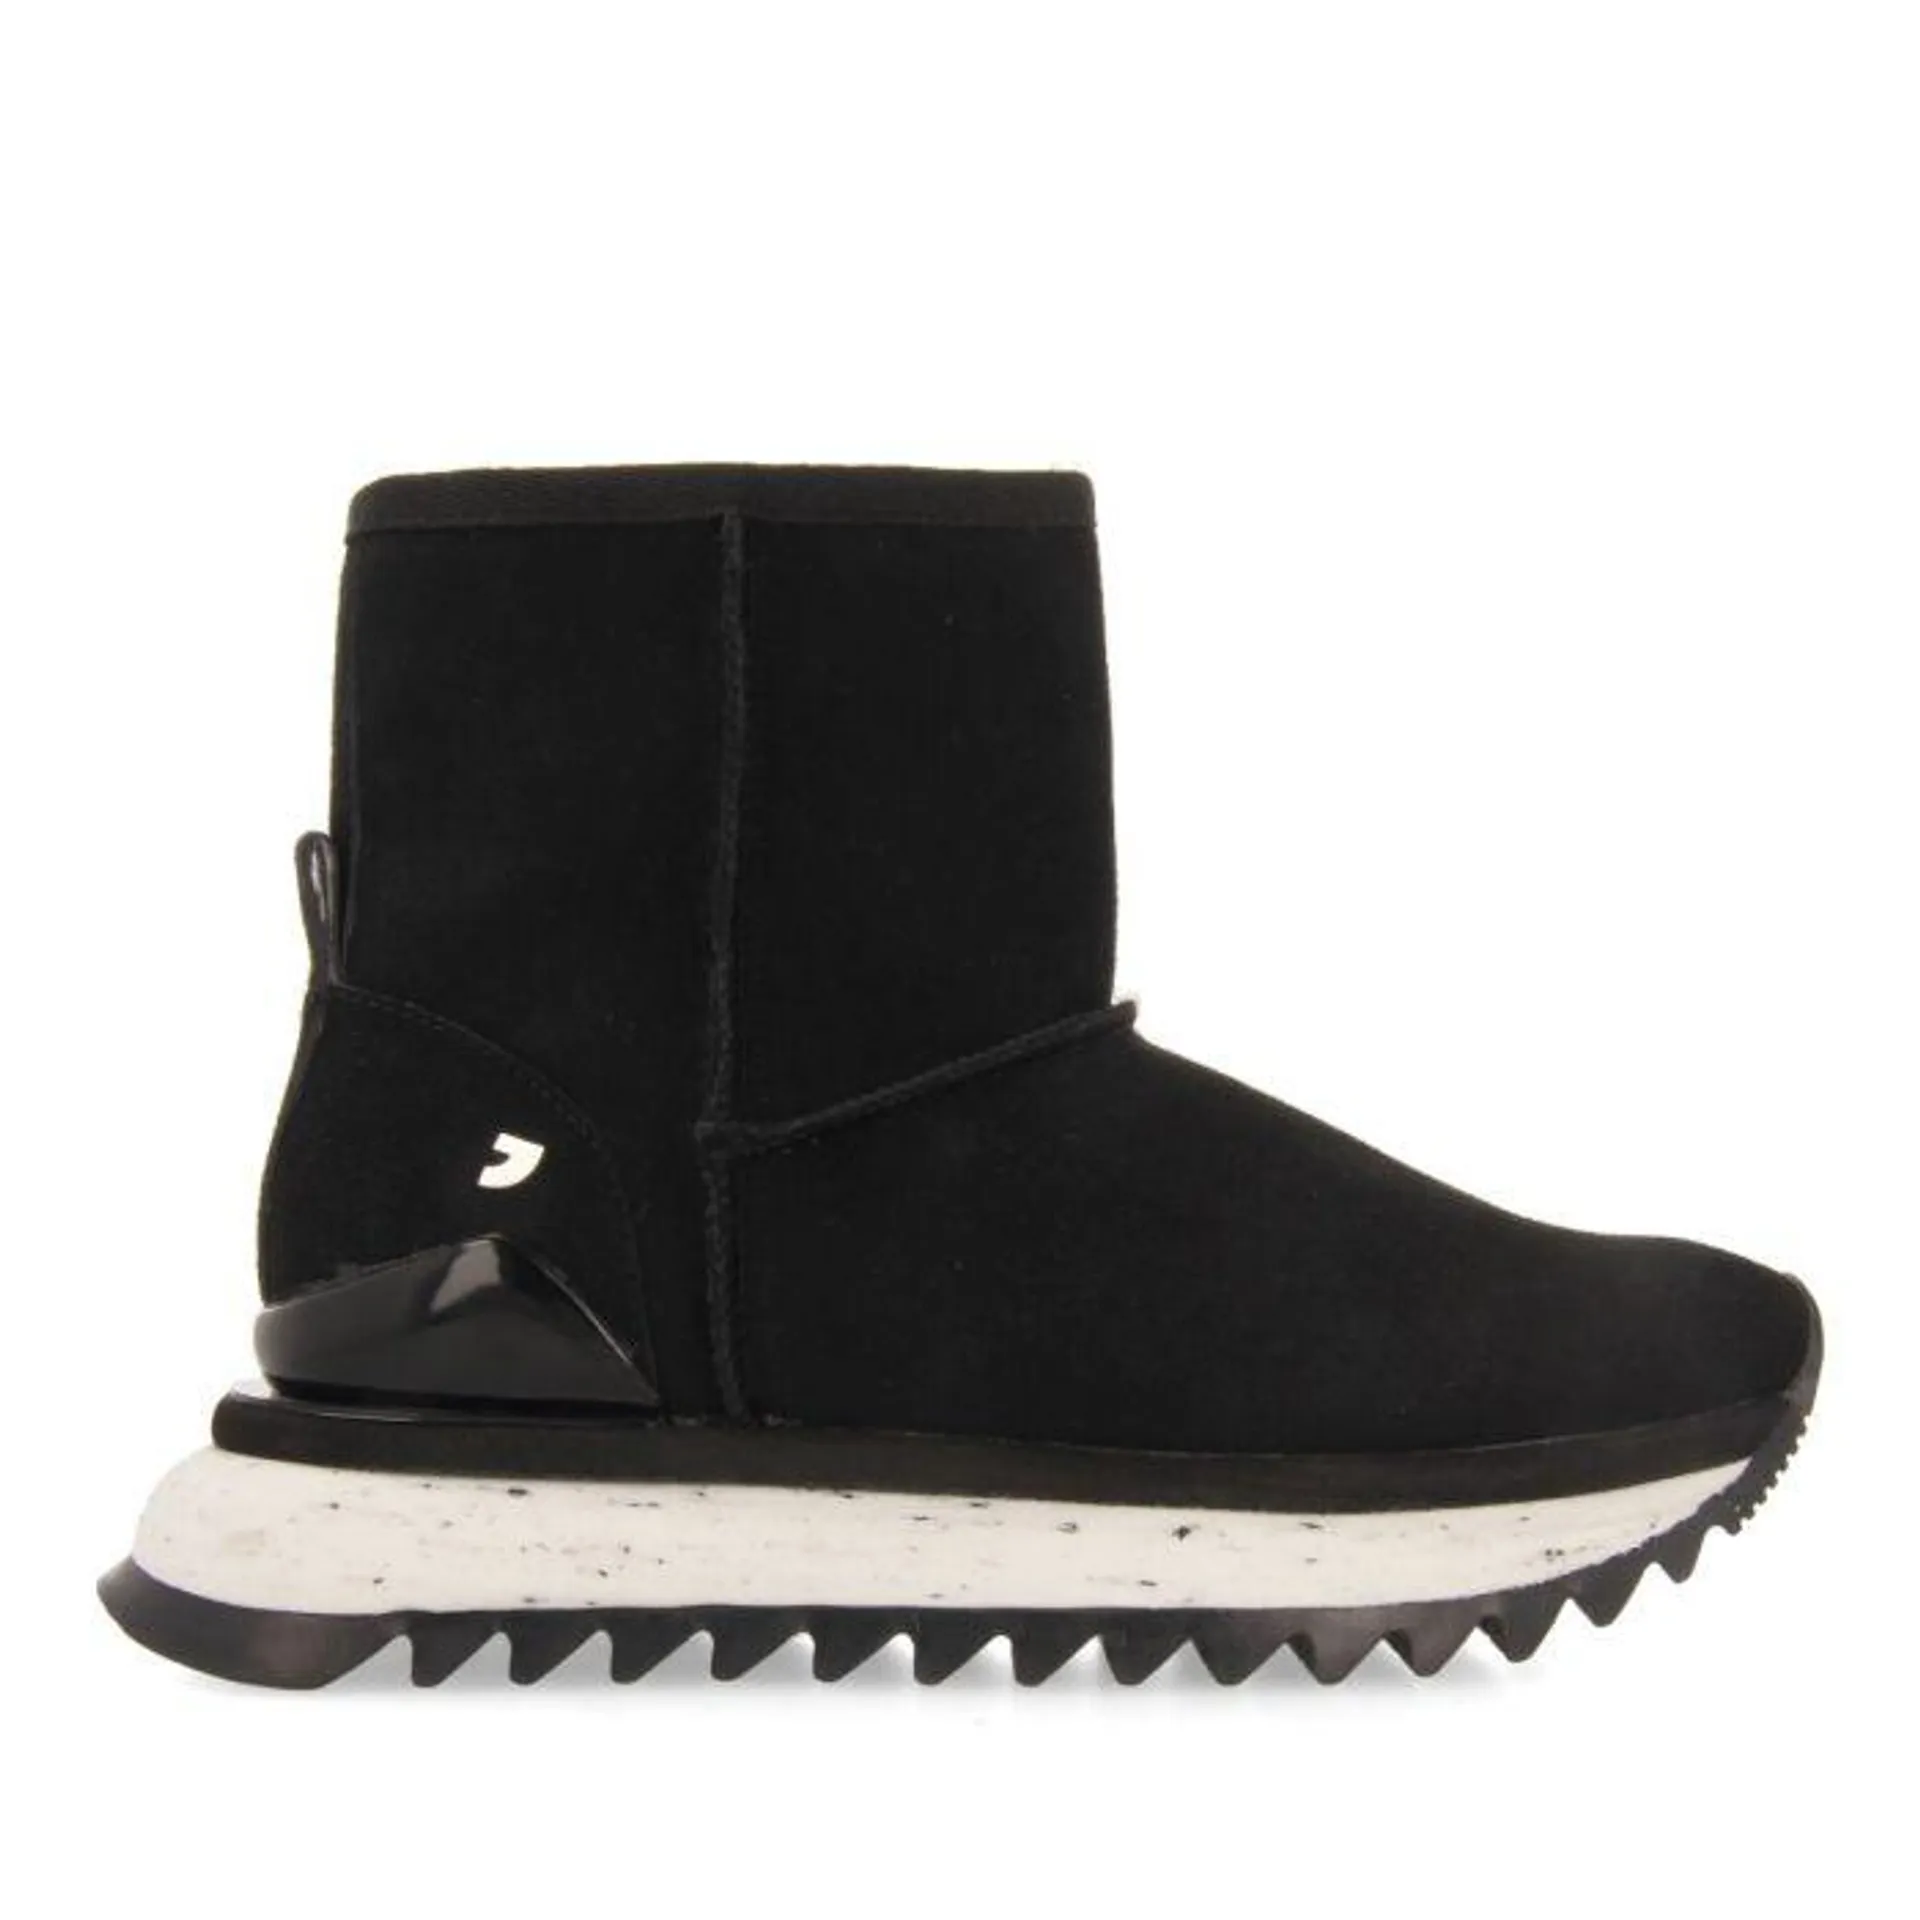 Amqui women's black shearling boot-style sneakers